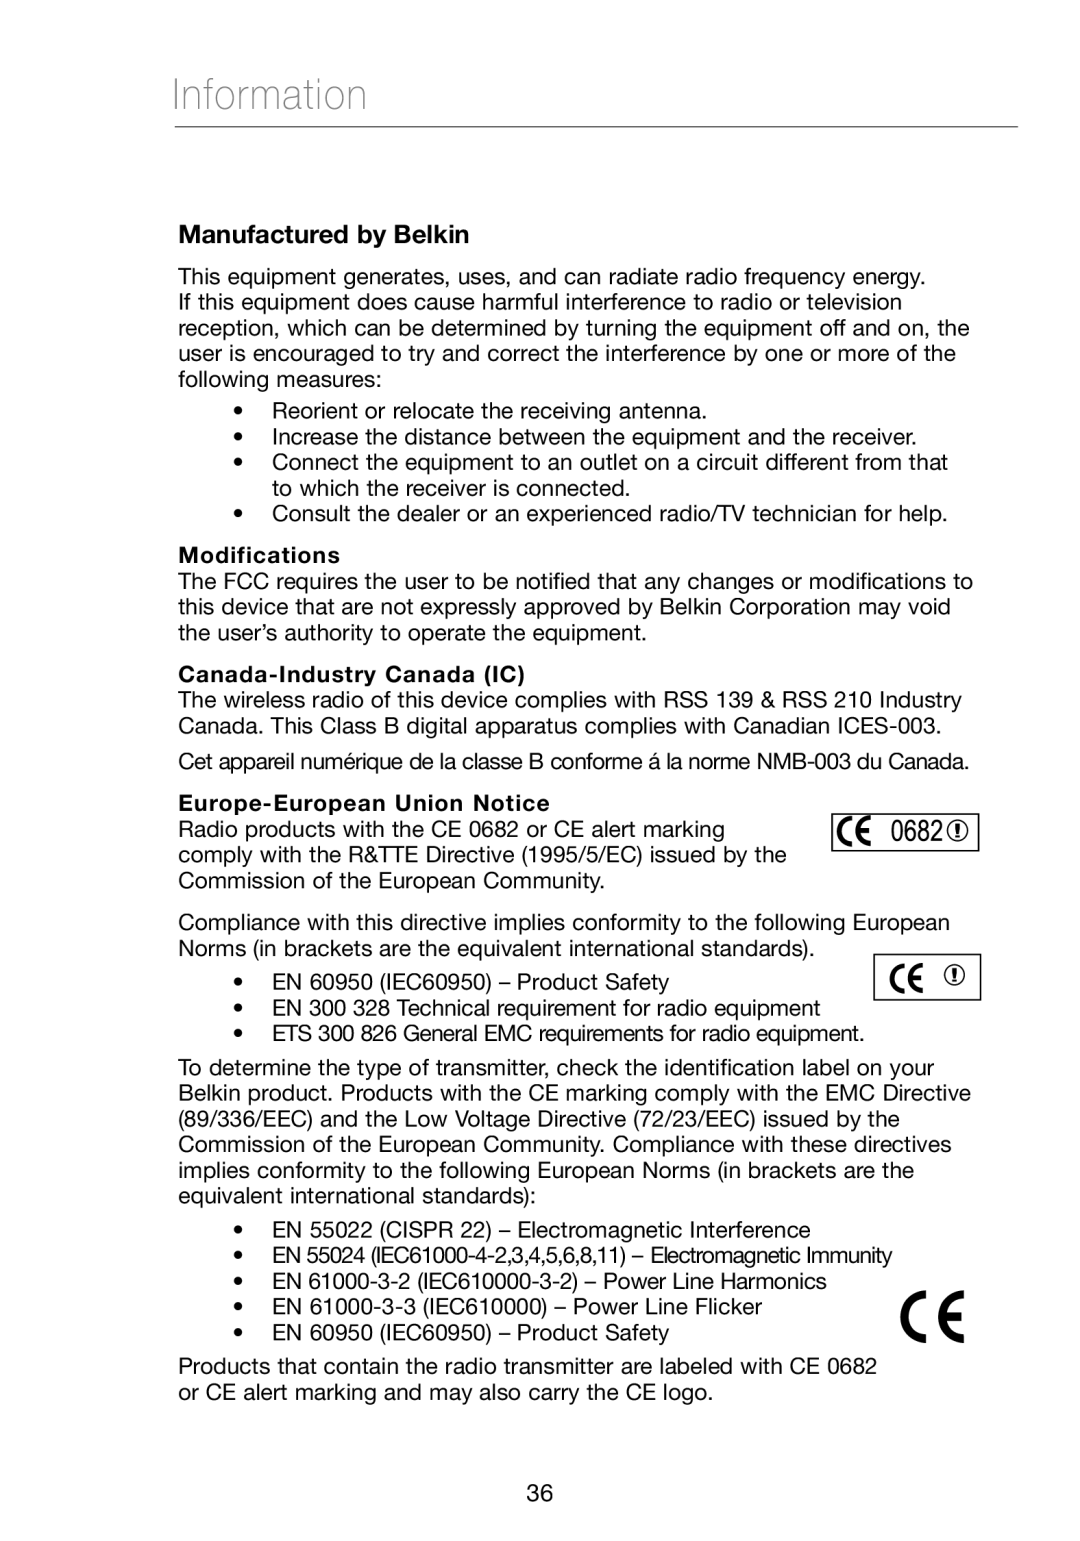 Verizon VZ4000 Information, Manufactured by Belkin, Modifications, Canada-Industry Canada IC, Europe-European Union Notice 